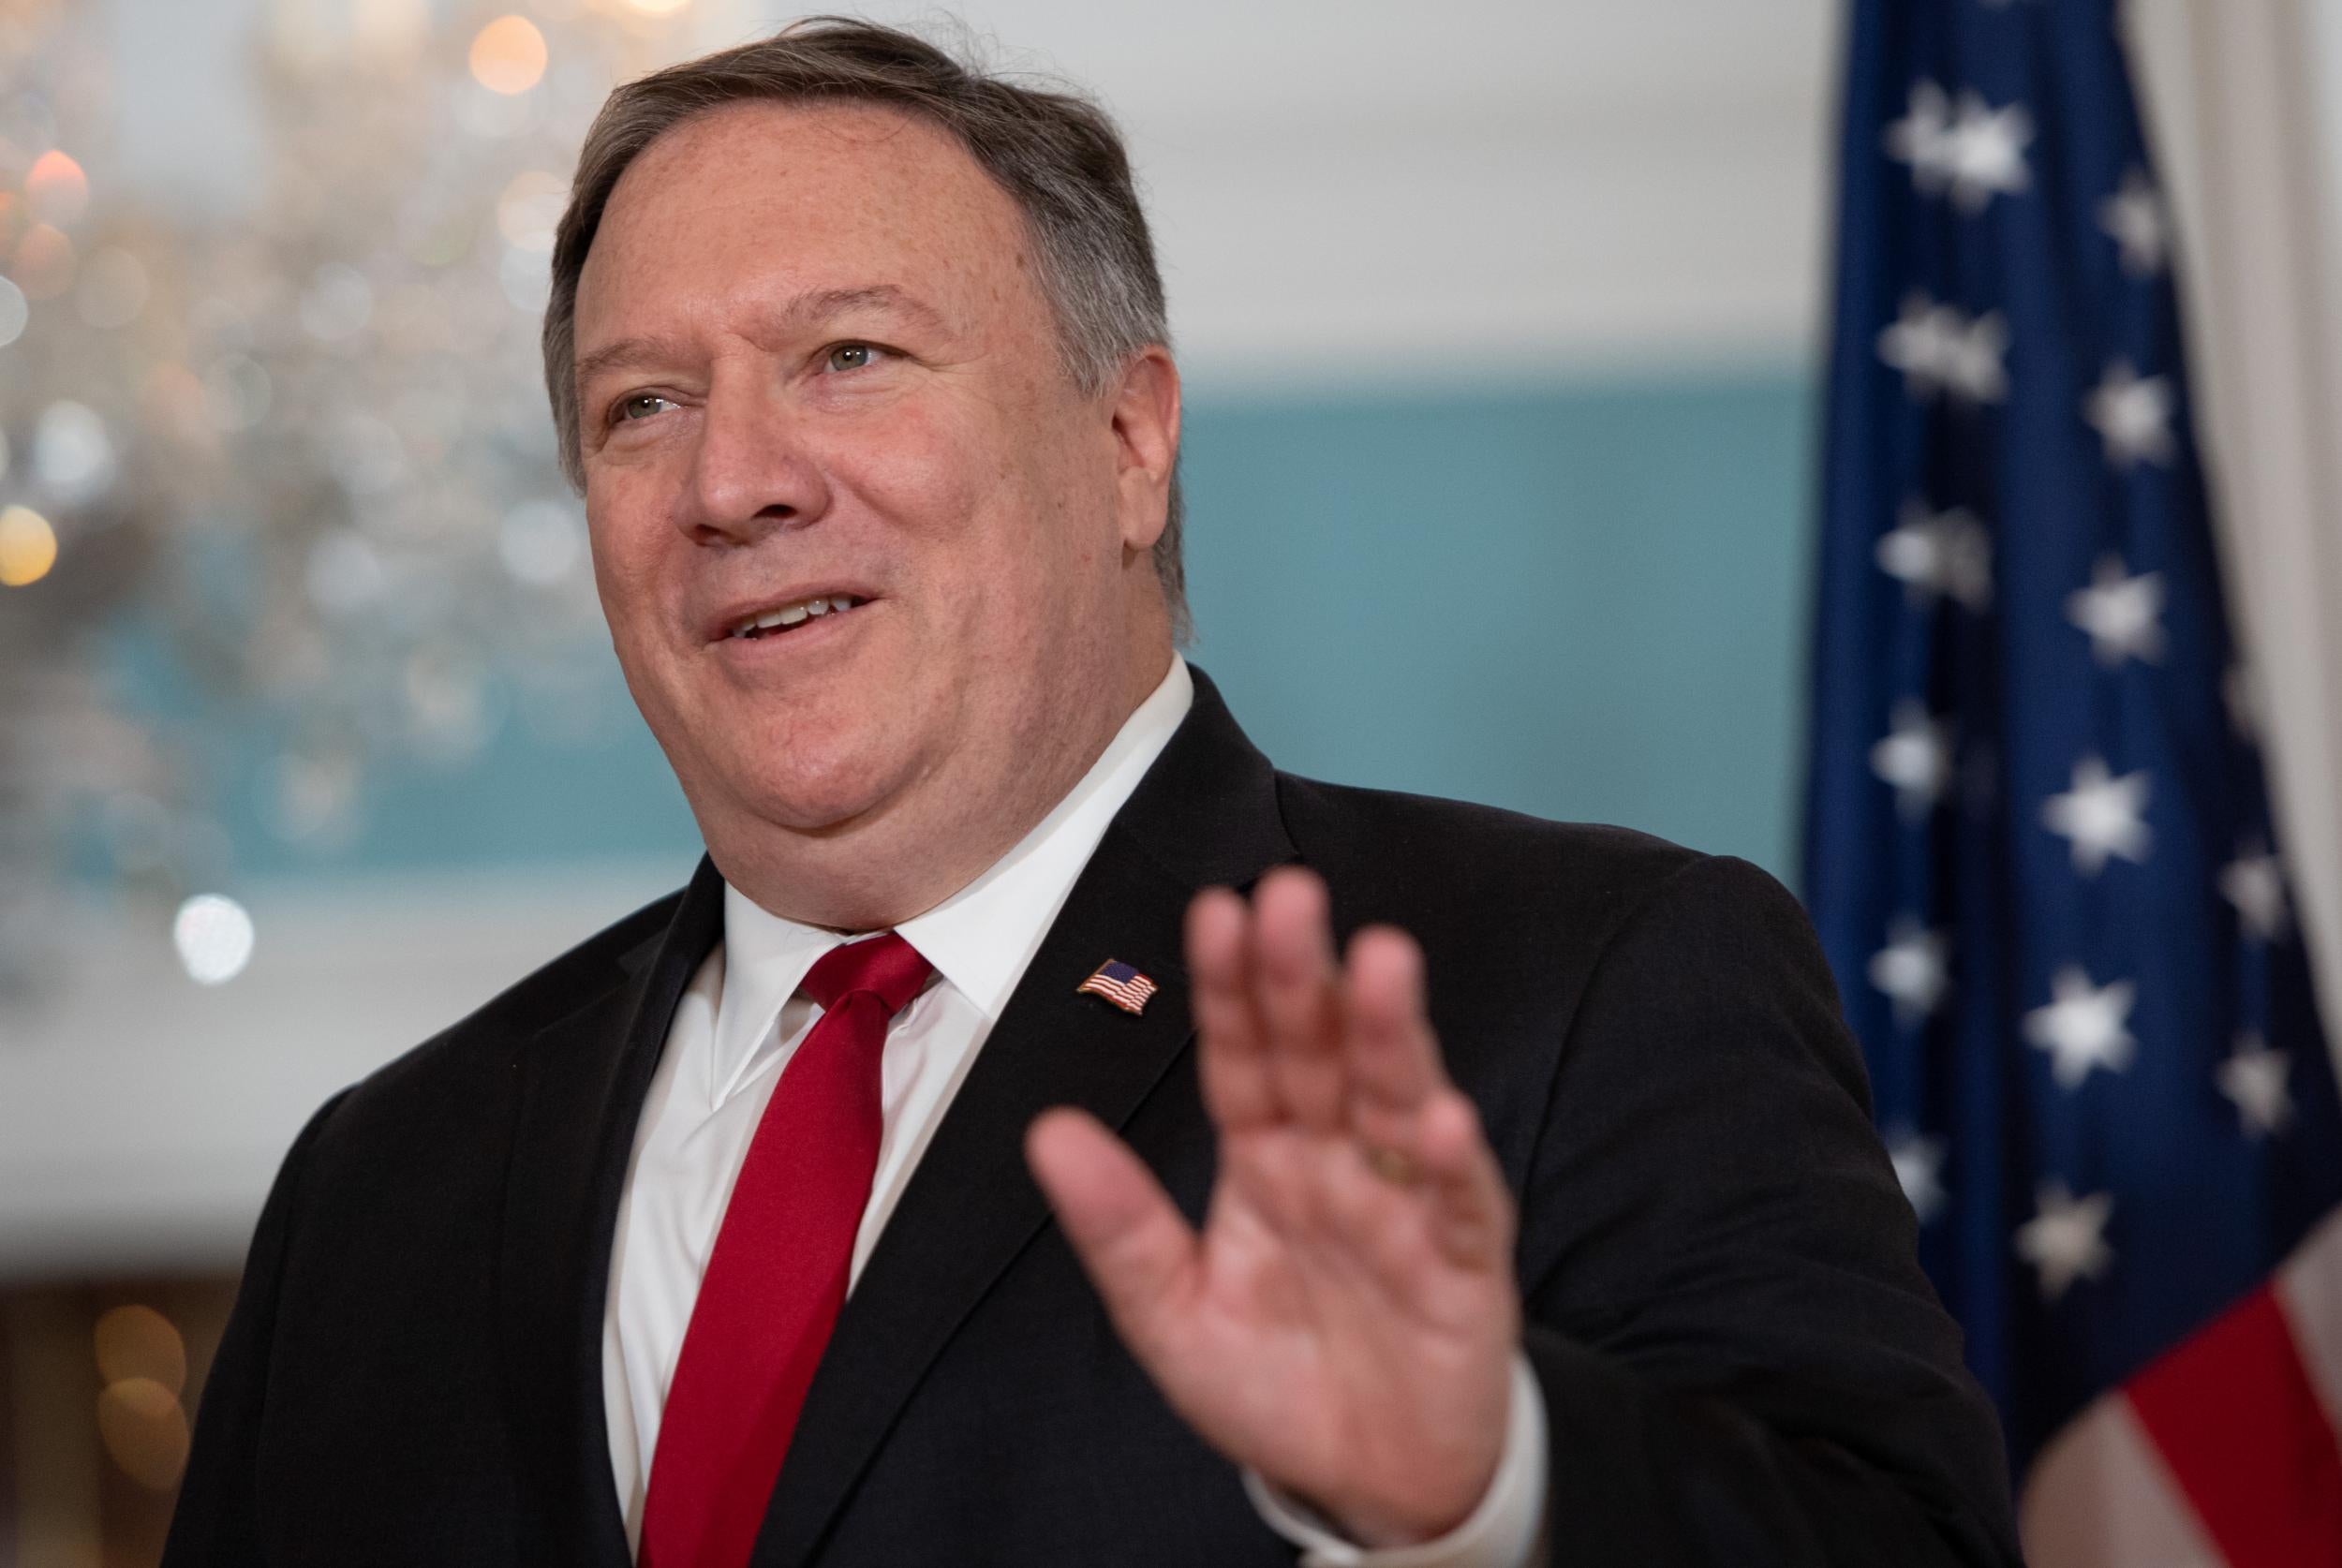 US secretary of?state Mike Pompeo waves to the media during a photo opportunity at the State Department (Saul Loeb/AFP/Getty)